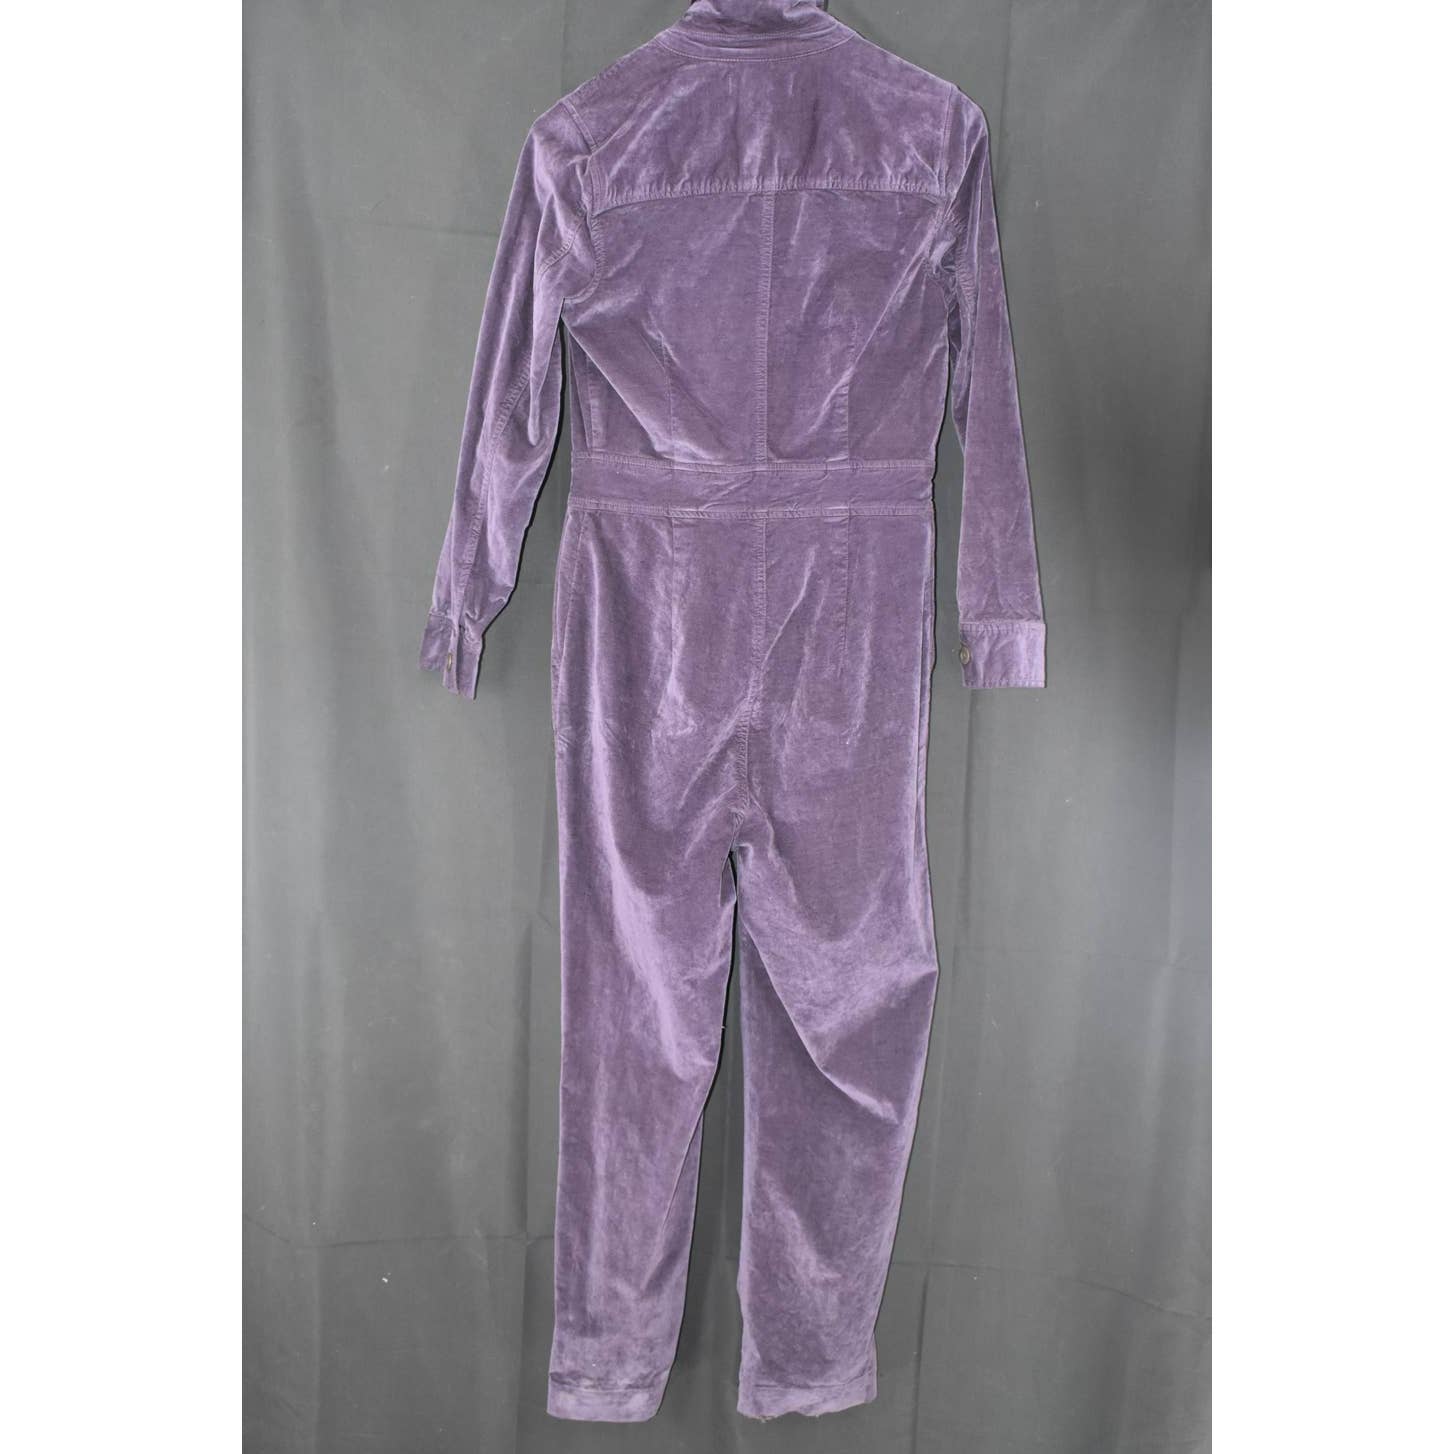 Madewell Grape Purple Velour Button Up Coveralls Jumpers - 0